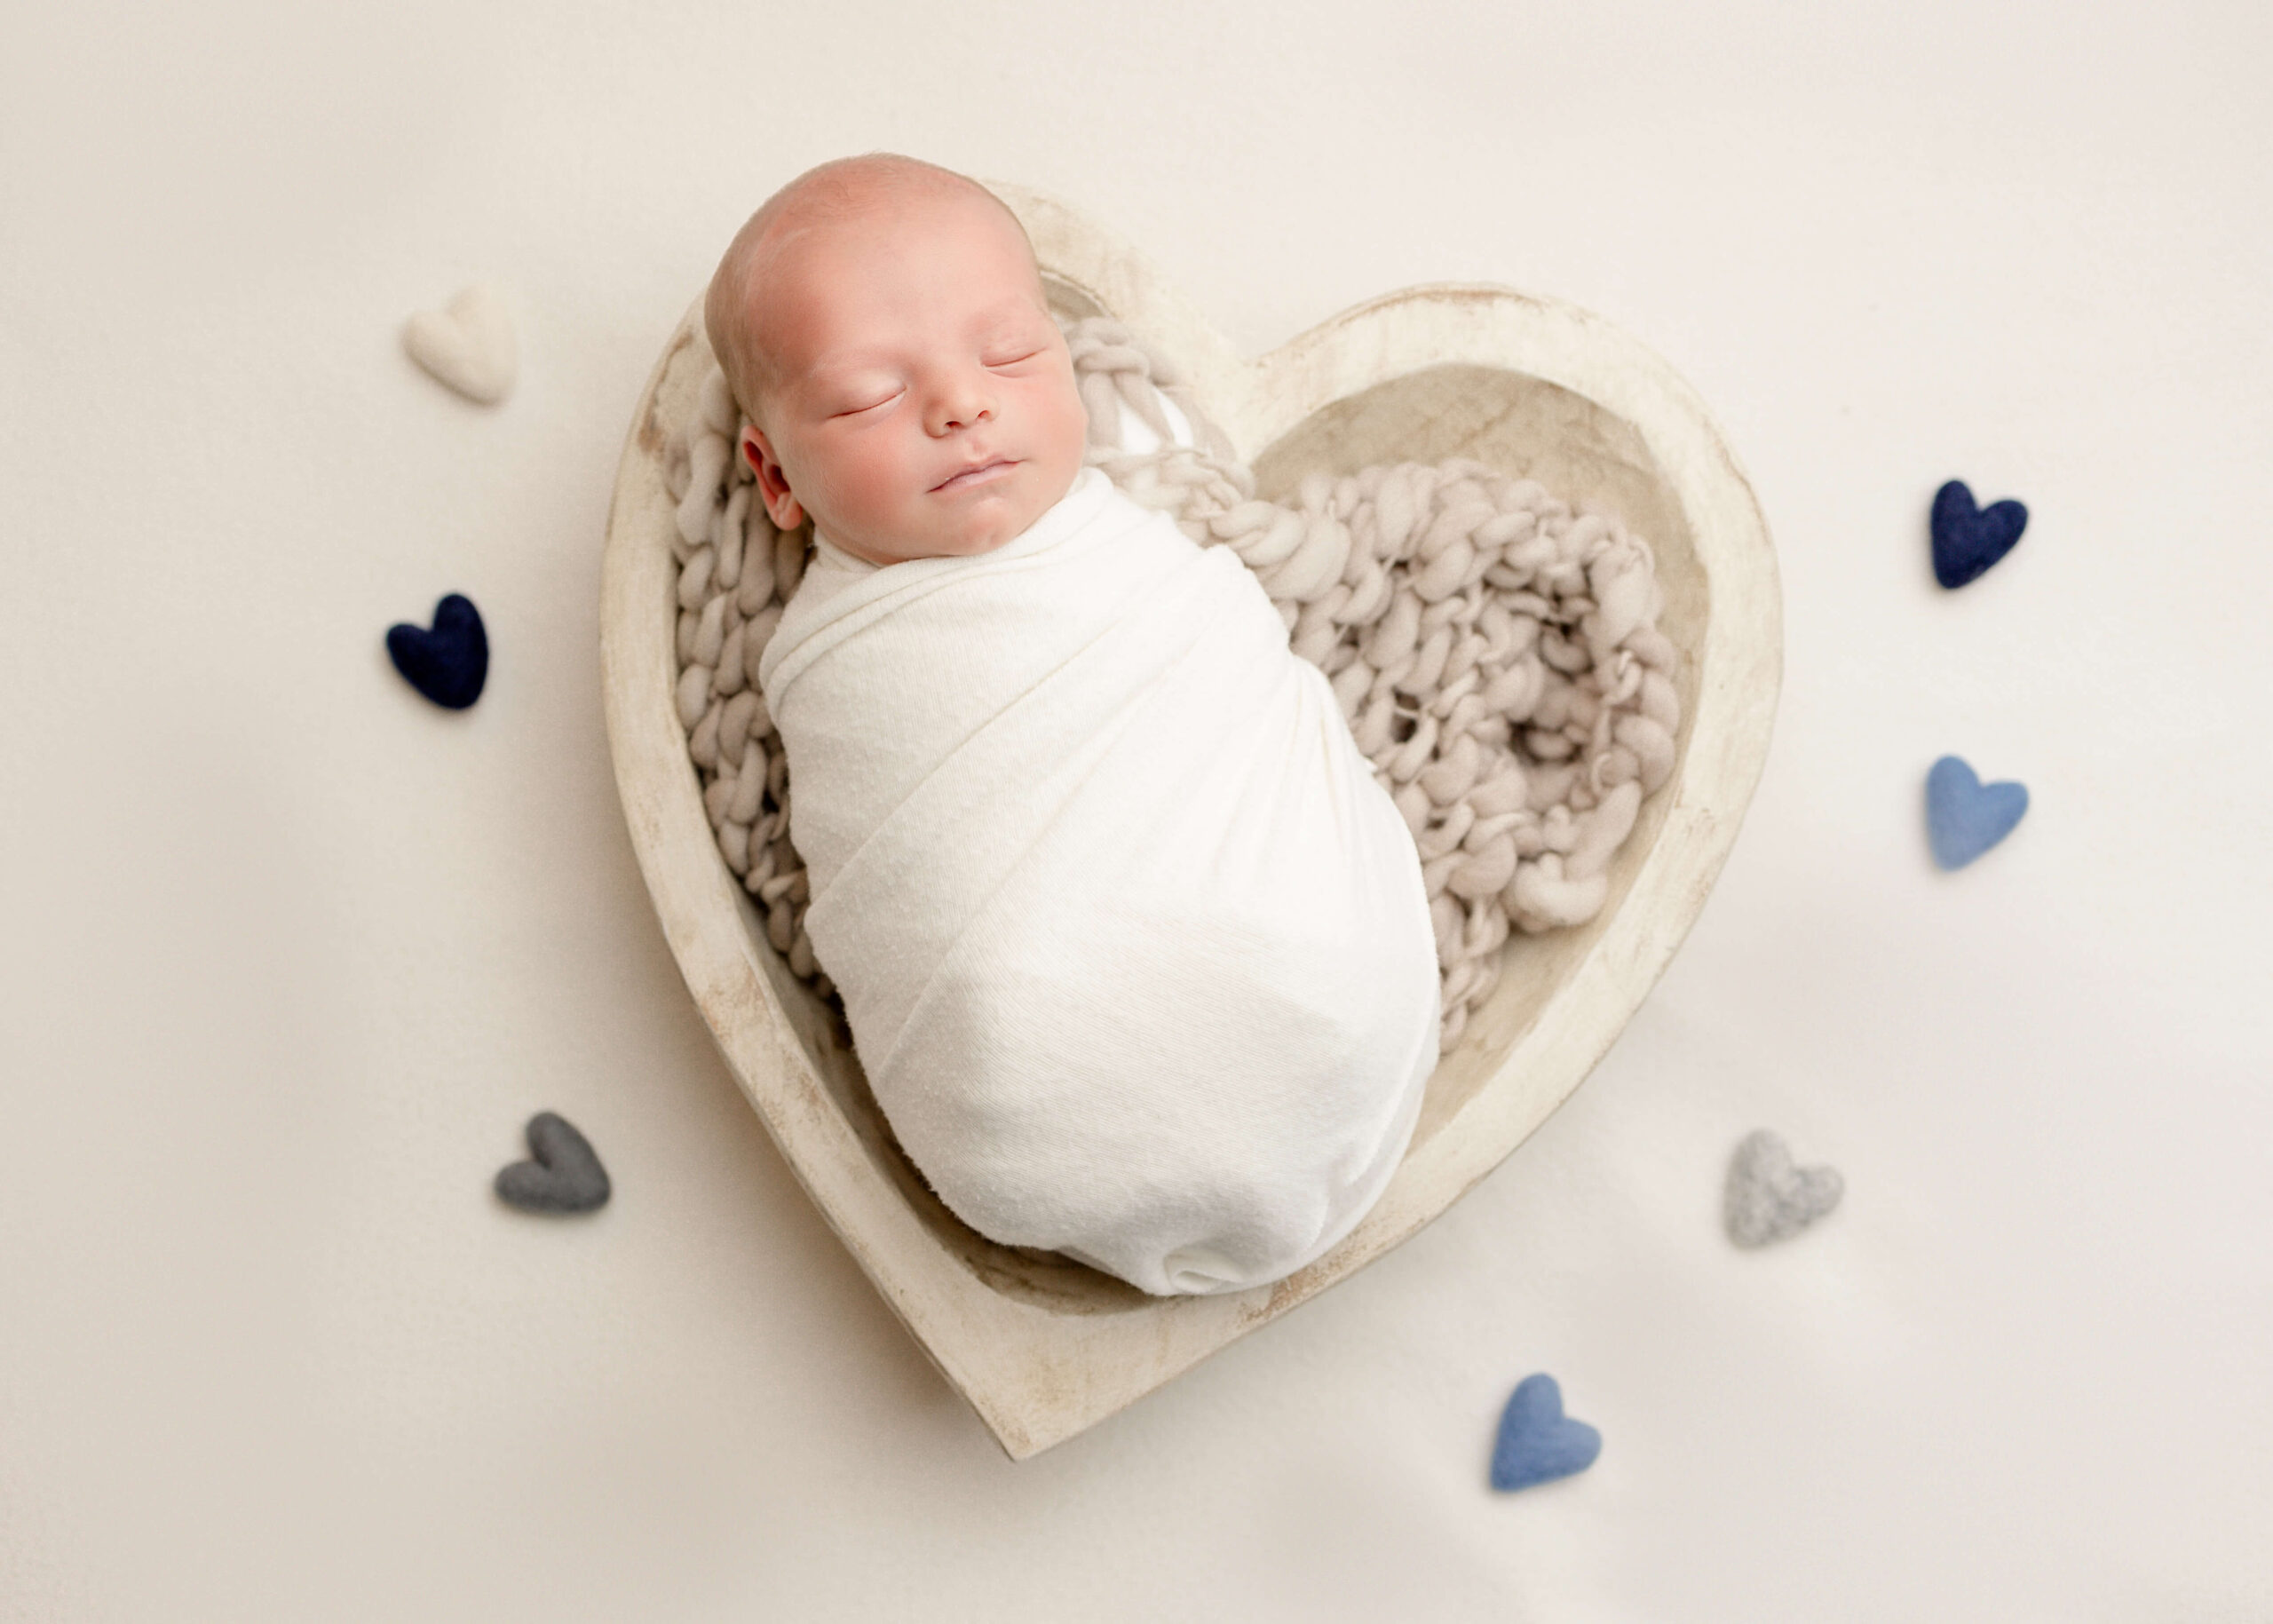 Baby boy wrapped in cream placed in white heart bowl with felt hearts placed around him.